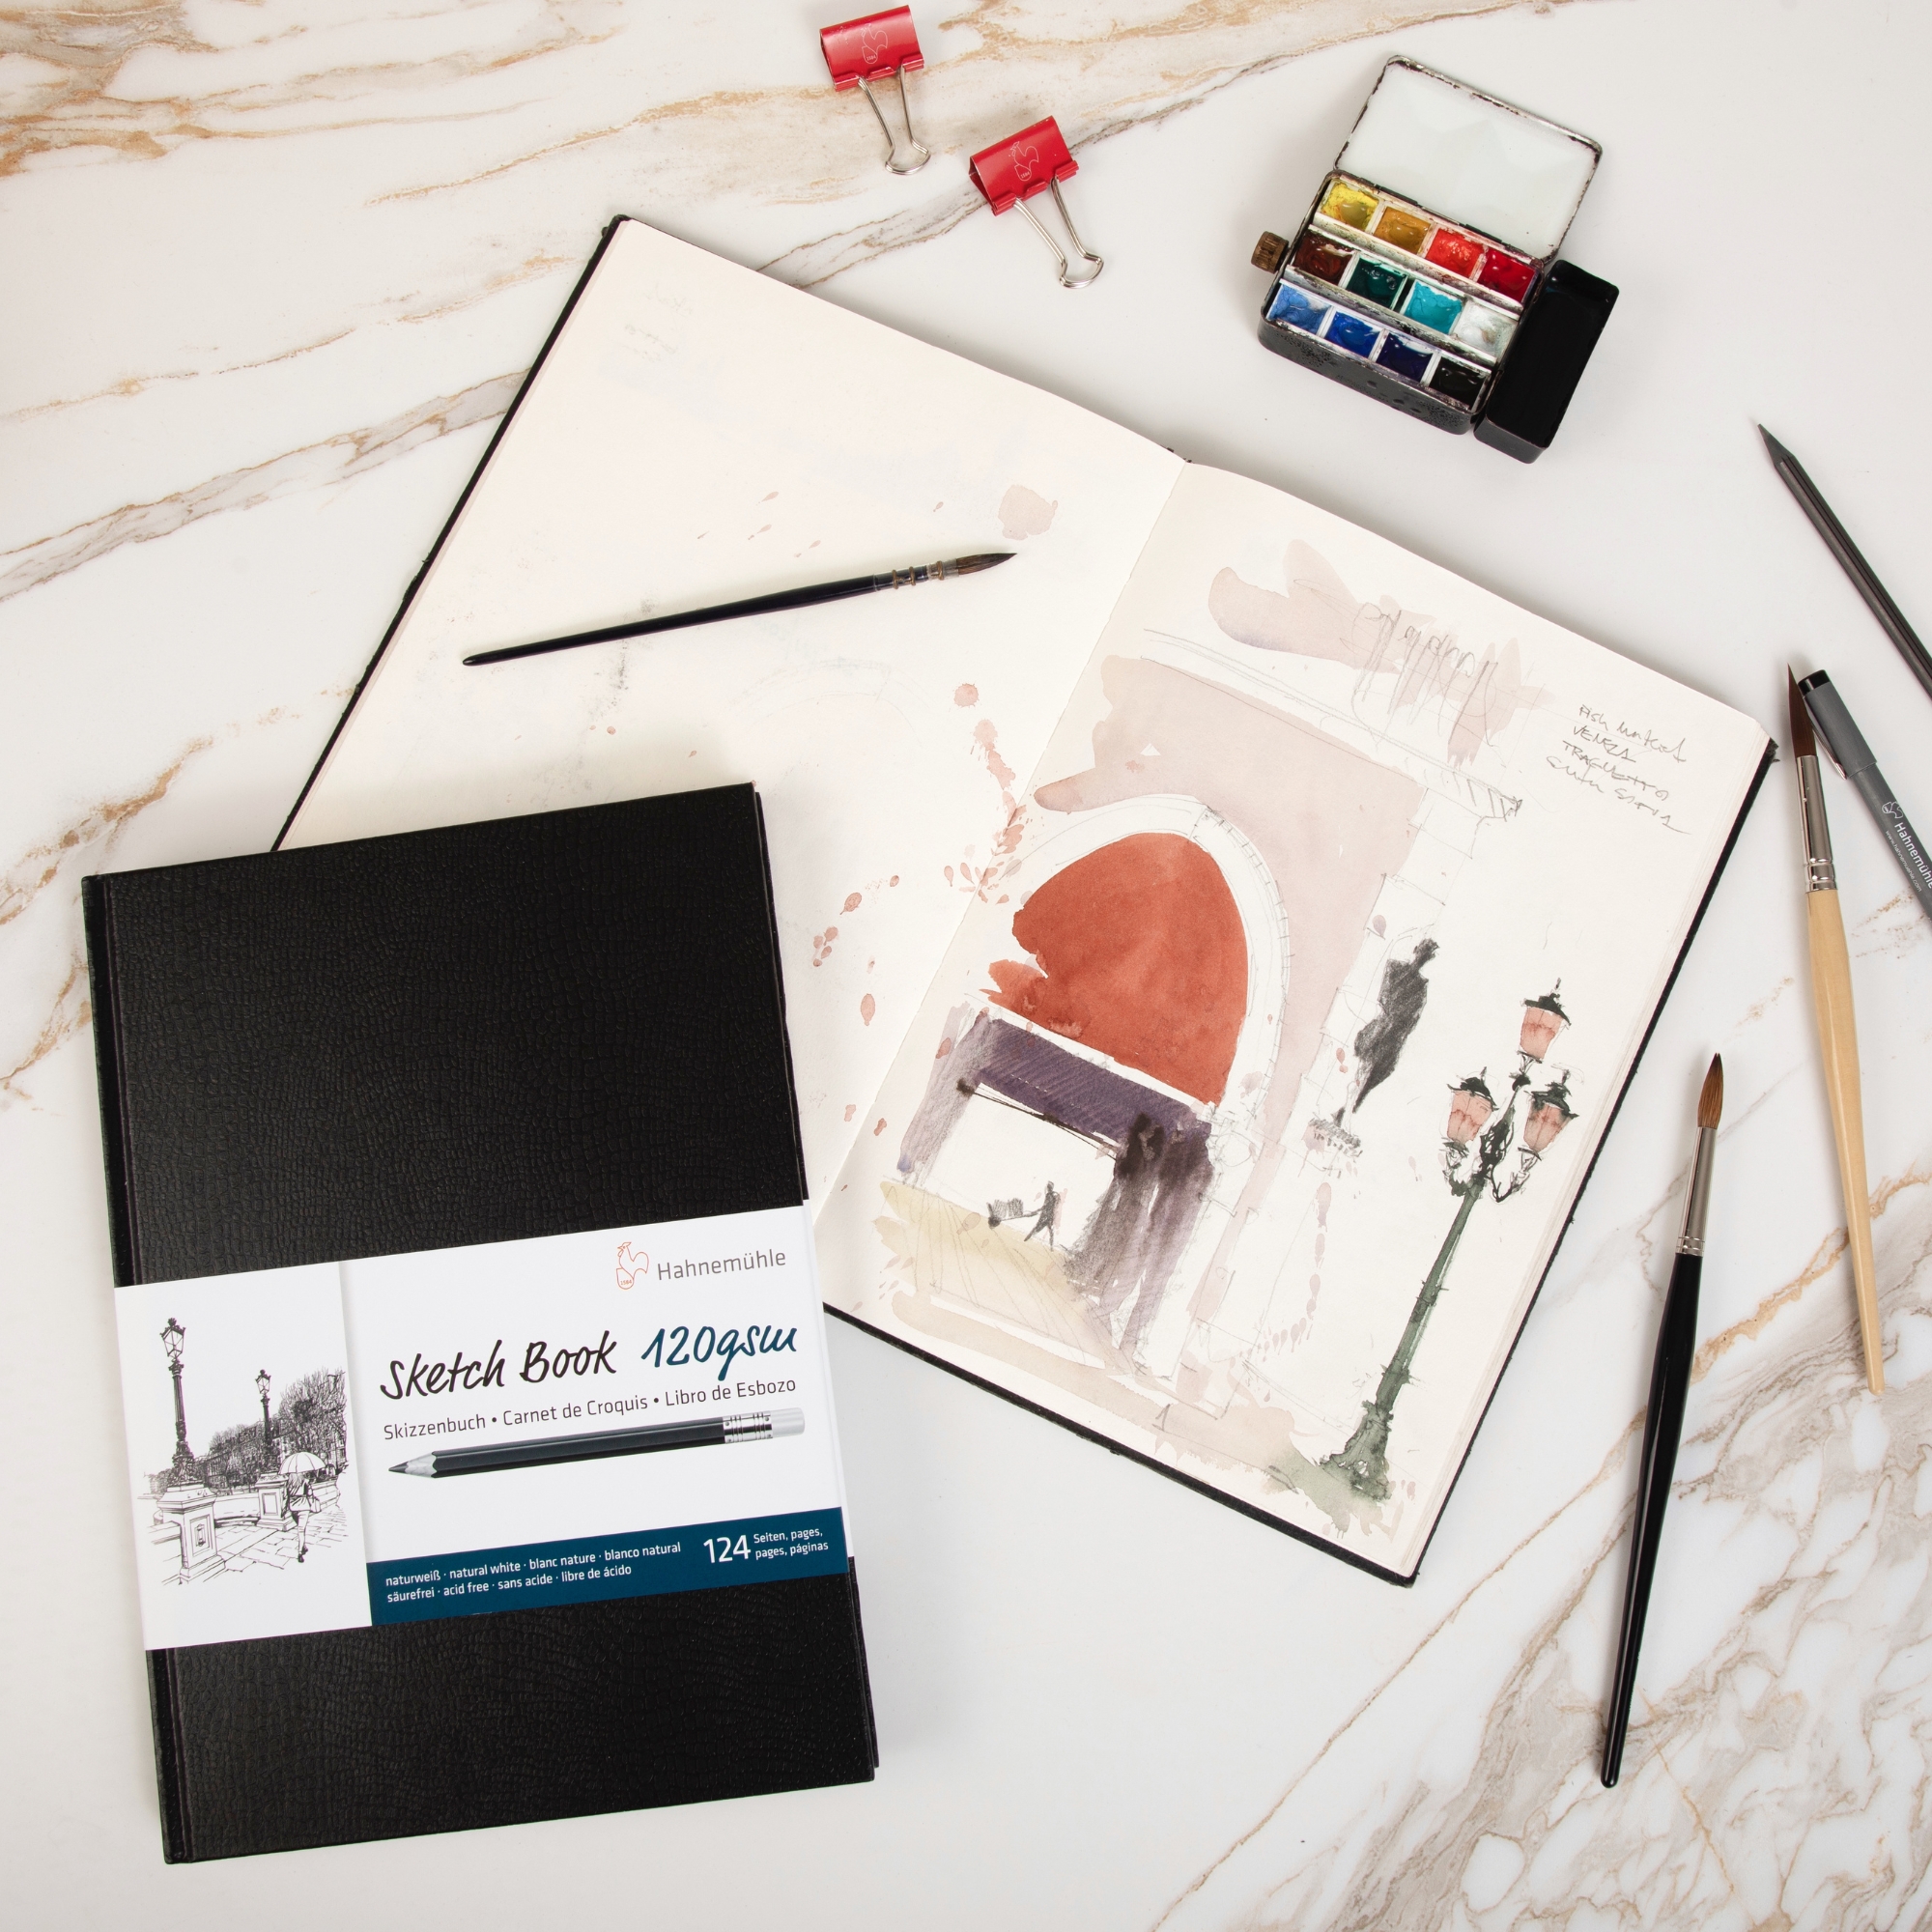 HahnemÃ¼hle Sketchbooks Review and Giveaway